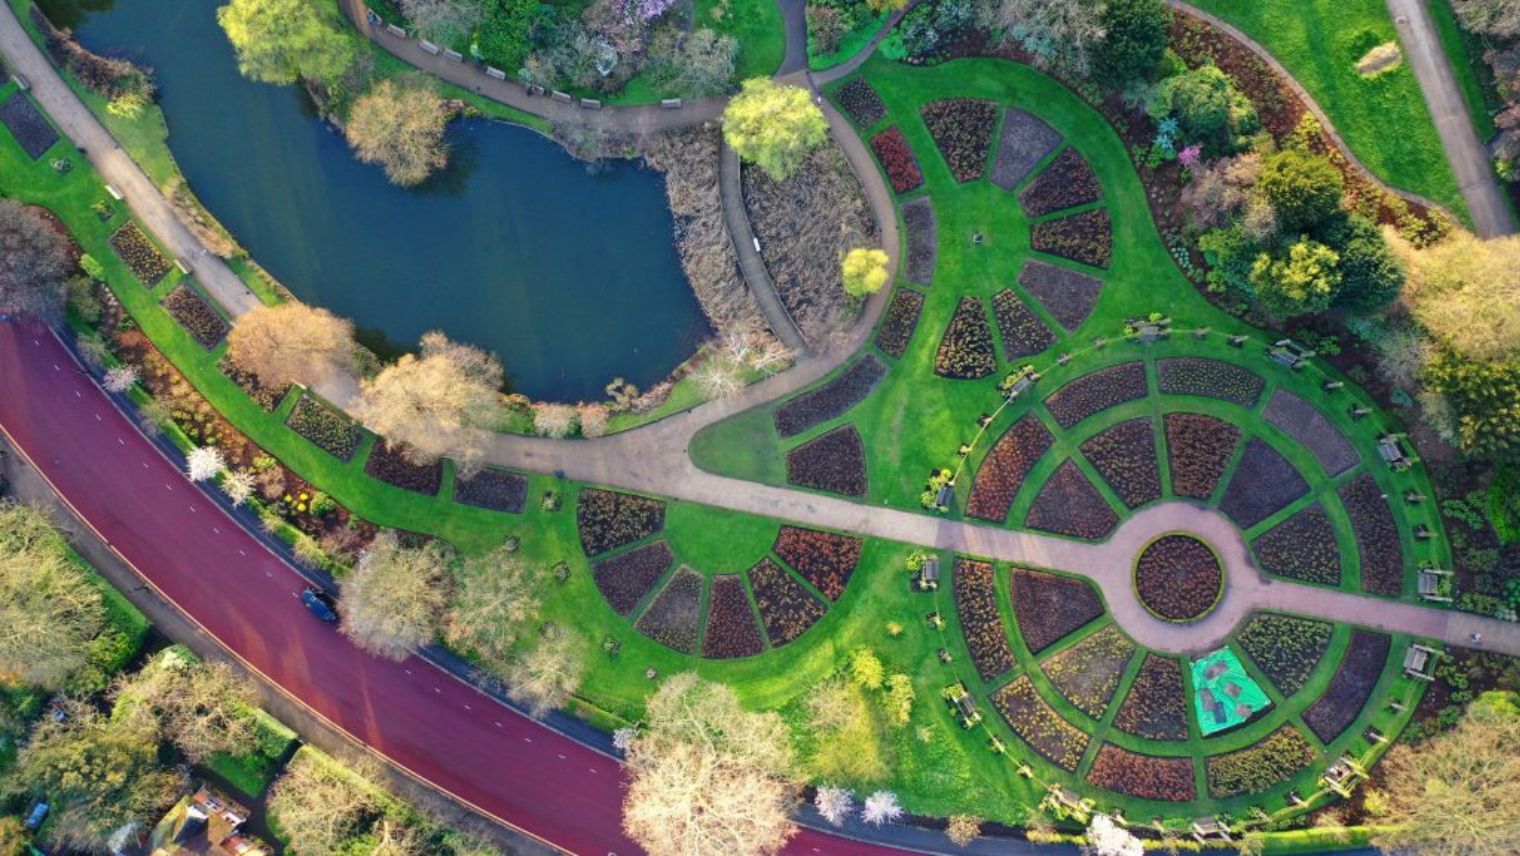 An ariel view of part of Regents park in London